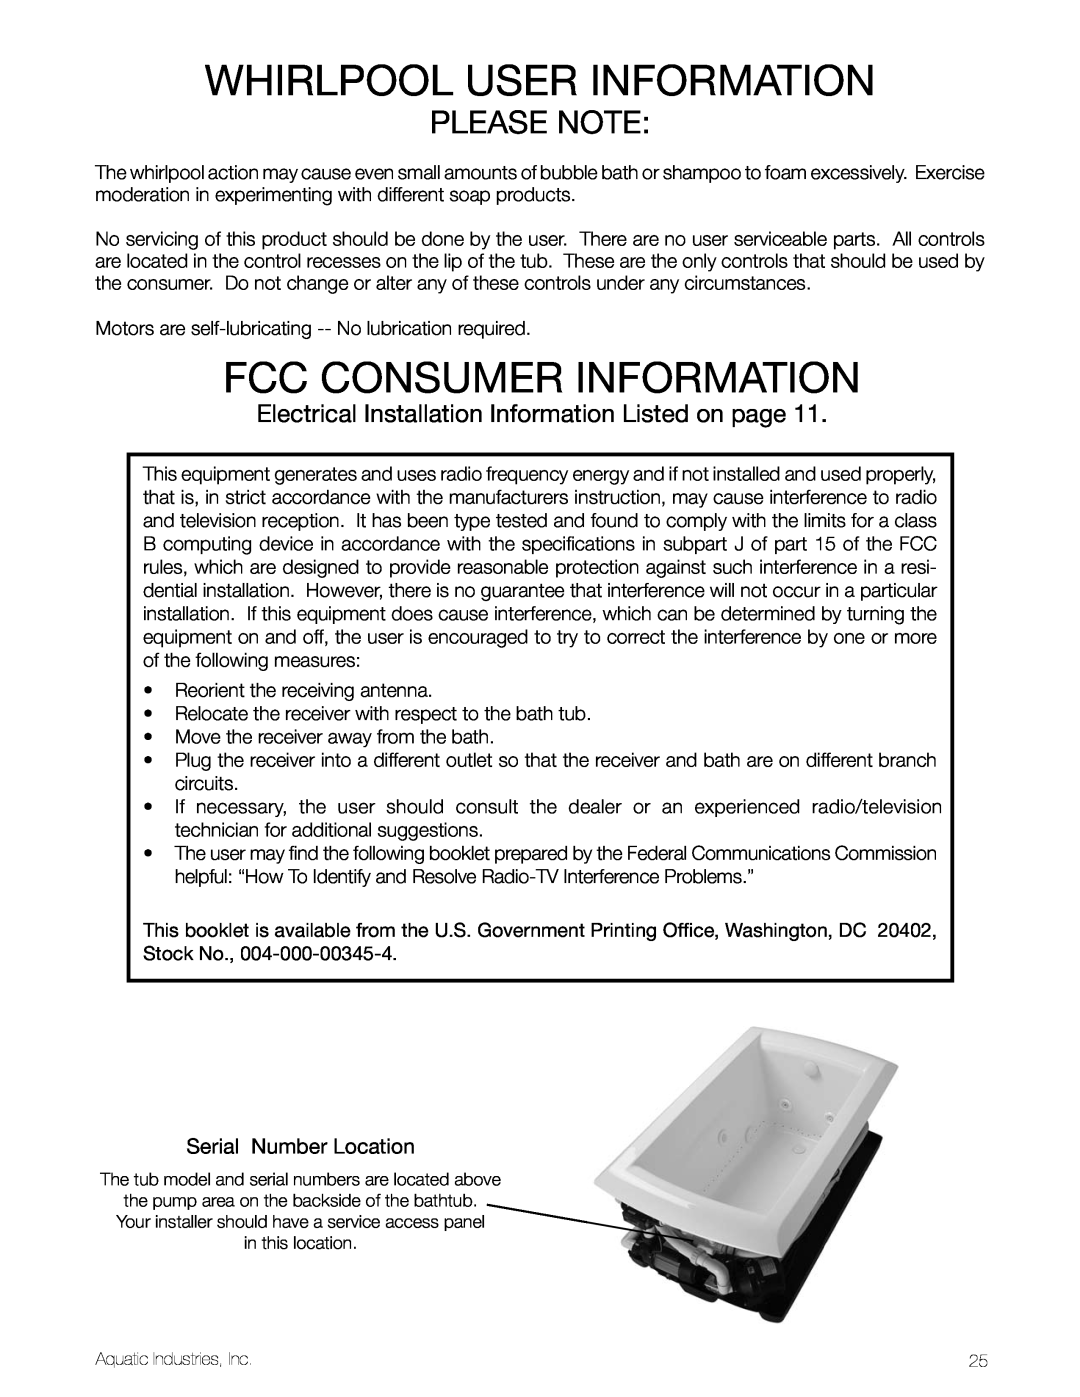 Aquatic LuxeAir Series whirlpool user information, fcc consumer information, Please note, Serial Number Location 